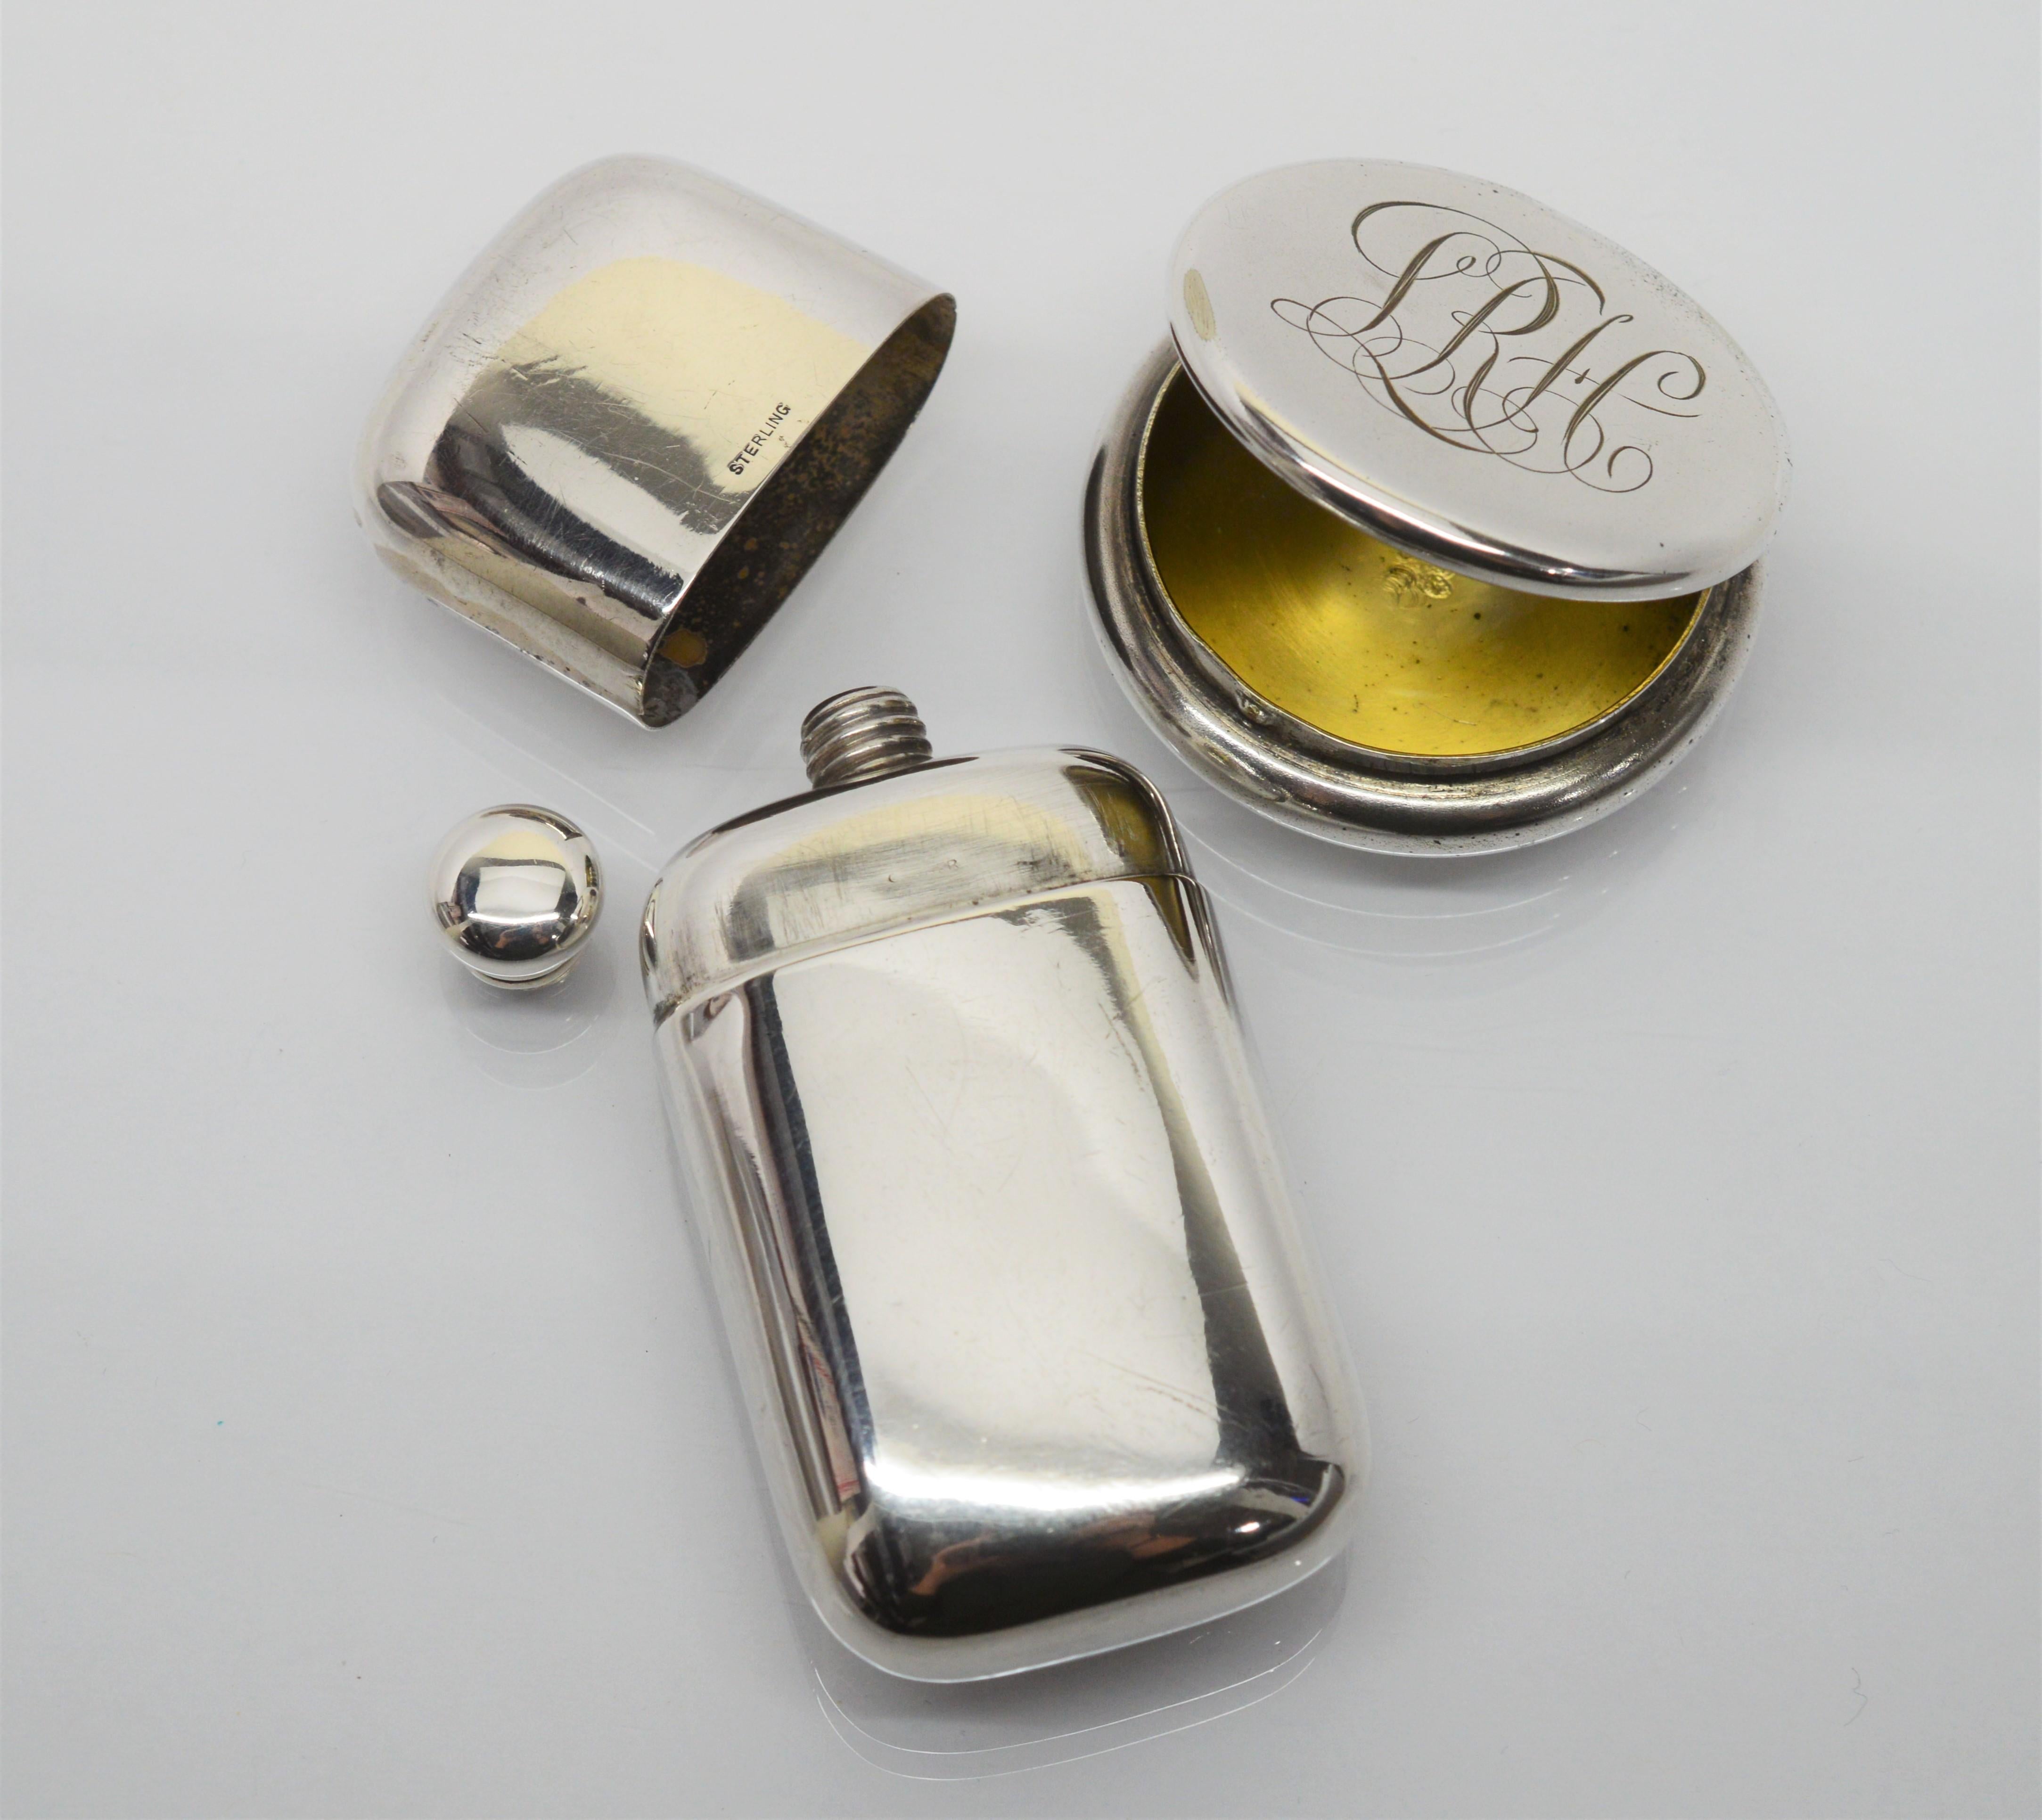 Mid-Century and American made, this personalized duo services its owner well as an nostalgic and elegant way to transport finer luxuries.
Carry a favorite scent along in this 3 x 1-1/2 inch sterling perfume bottle outfitted with secure screw top and